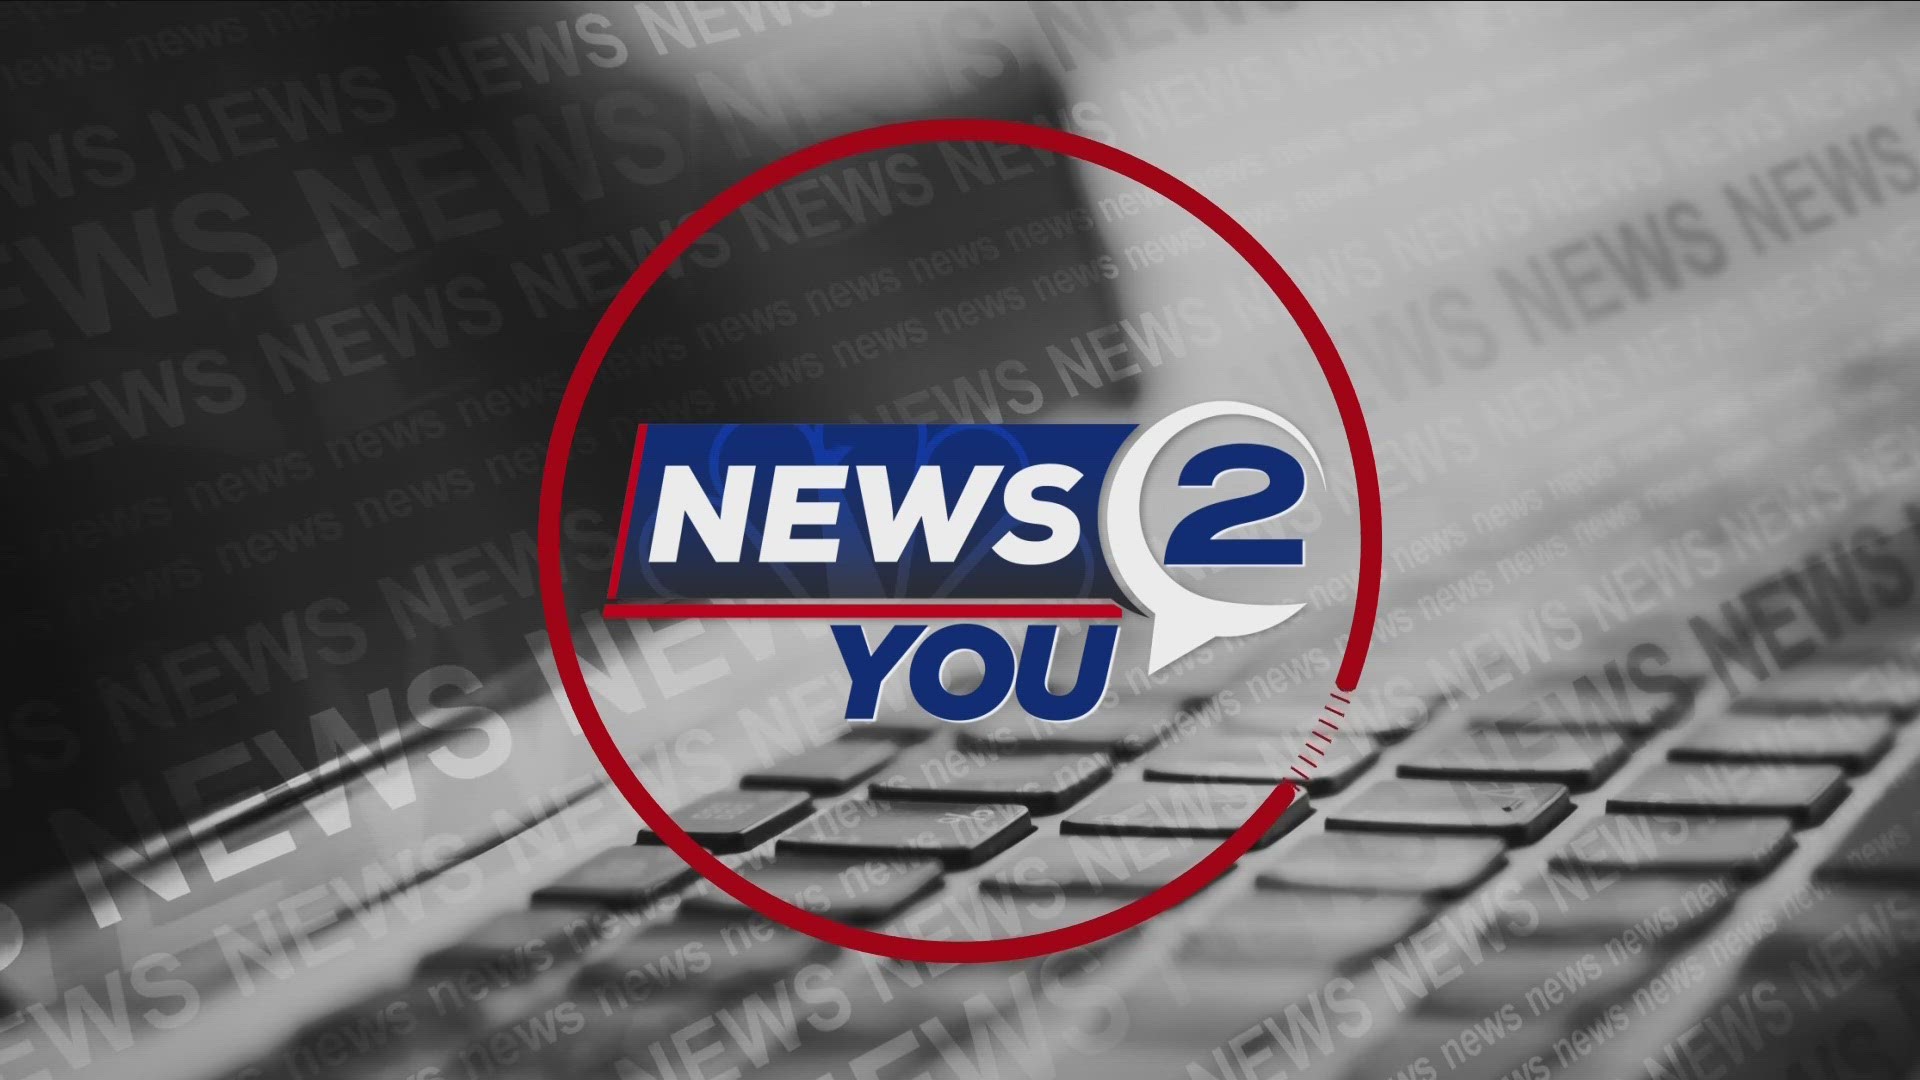 Dave mckinley remembers when those stories.. and more.. were all "news 2 you."